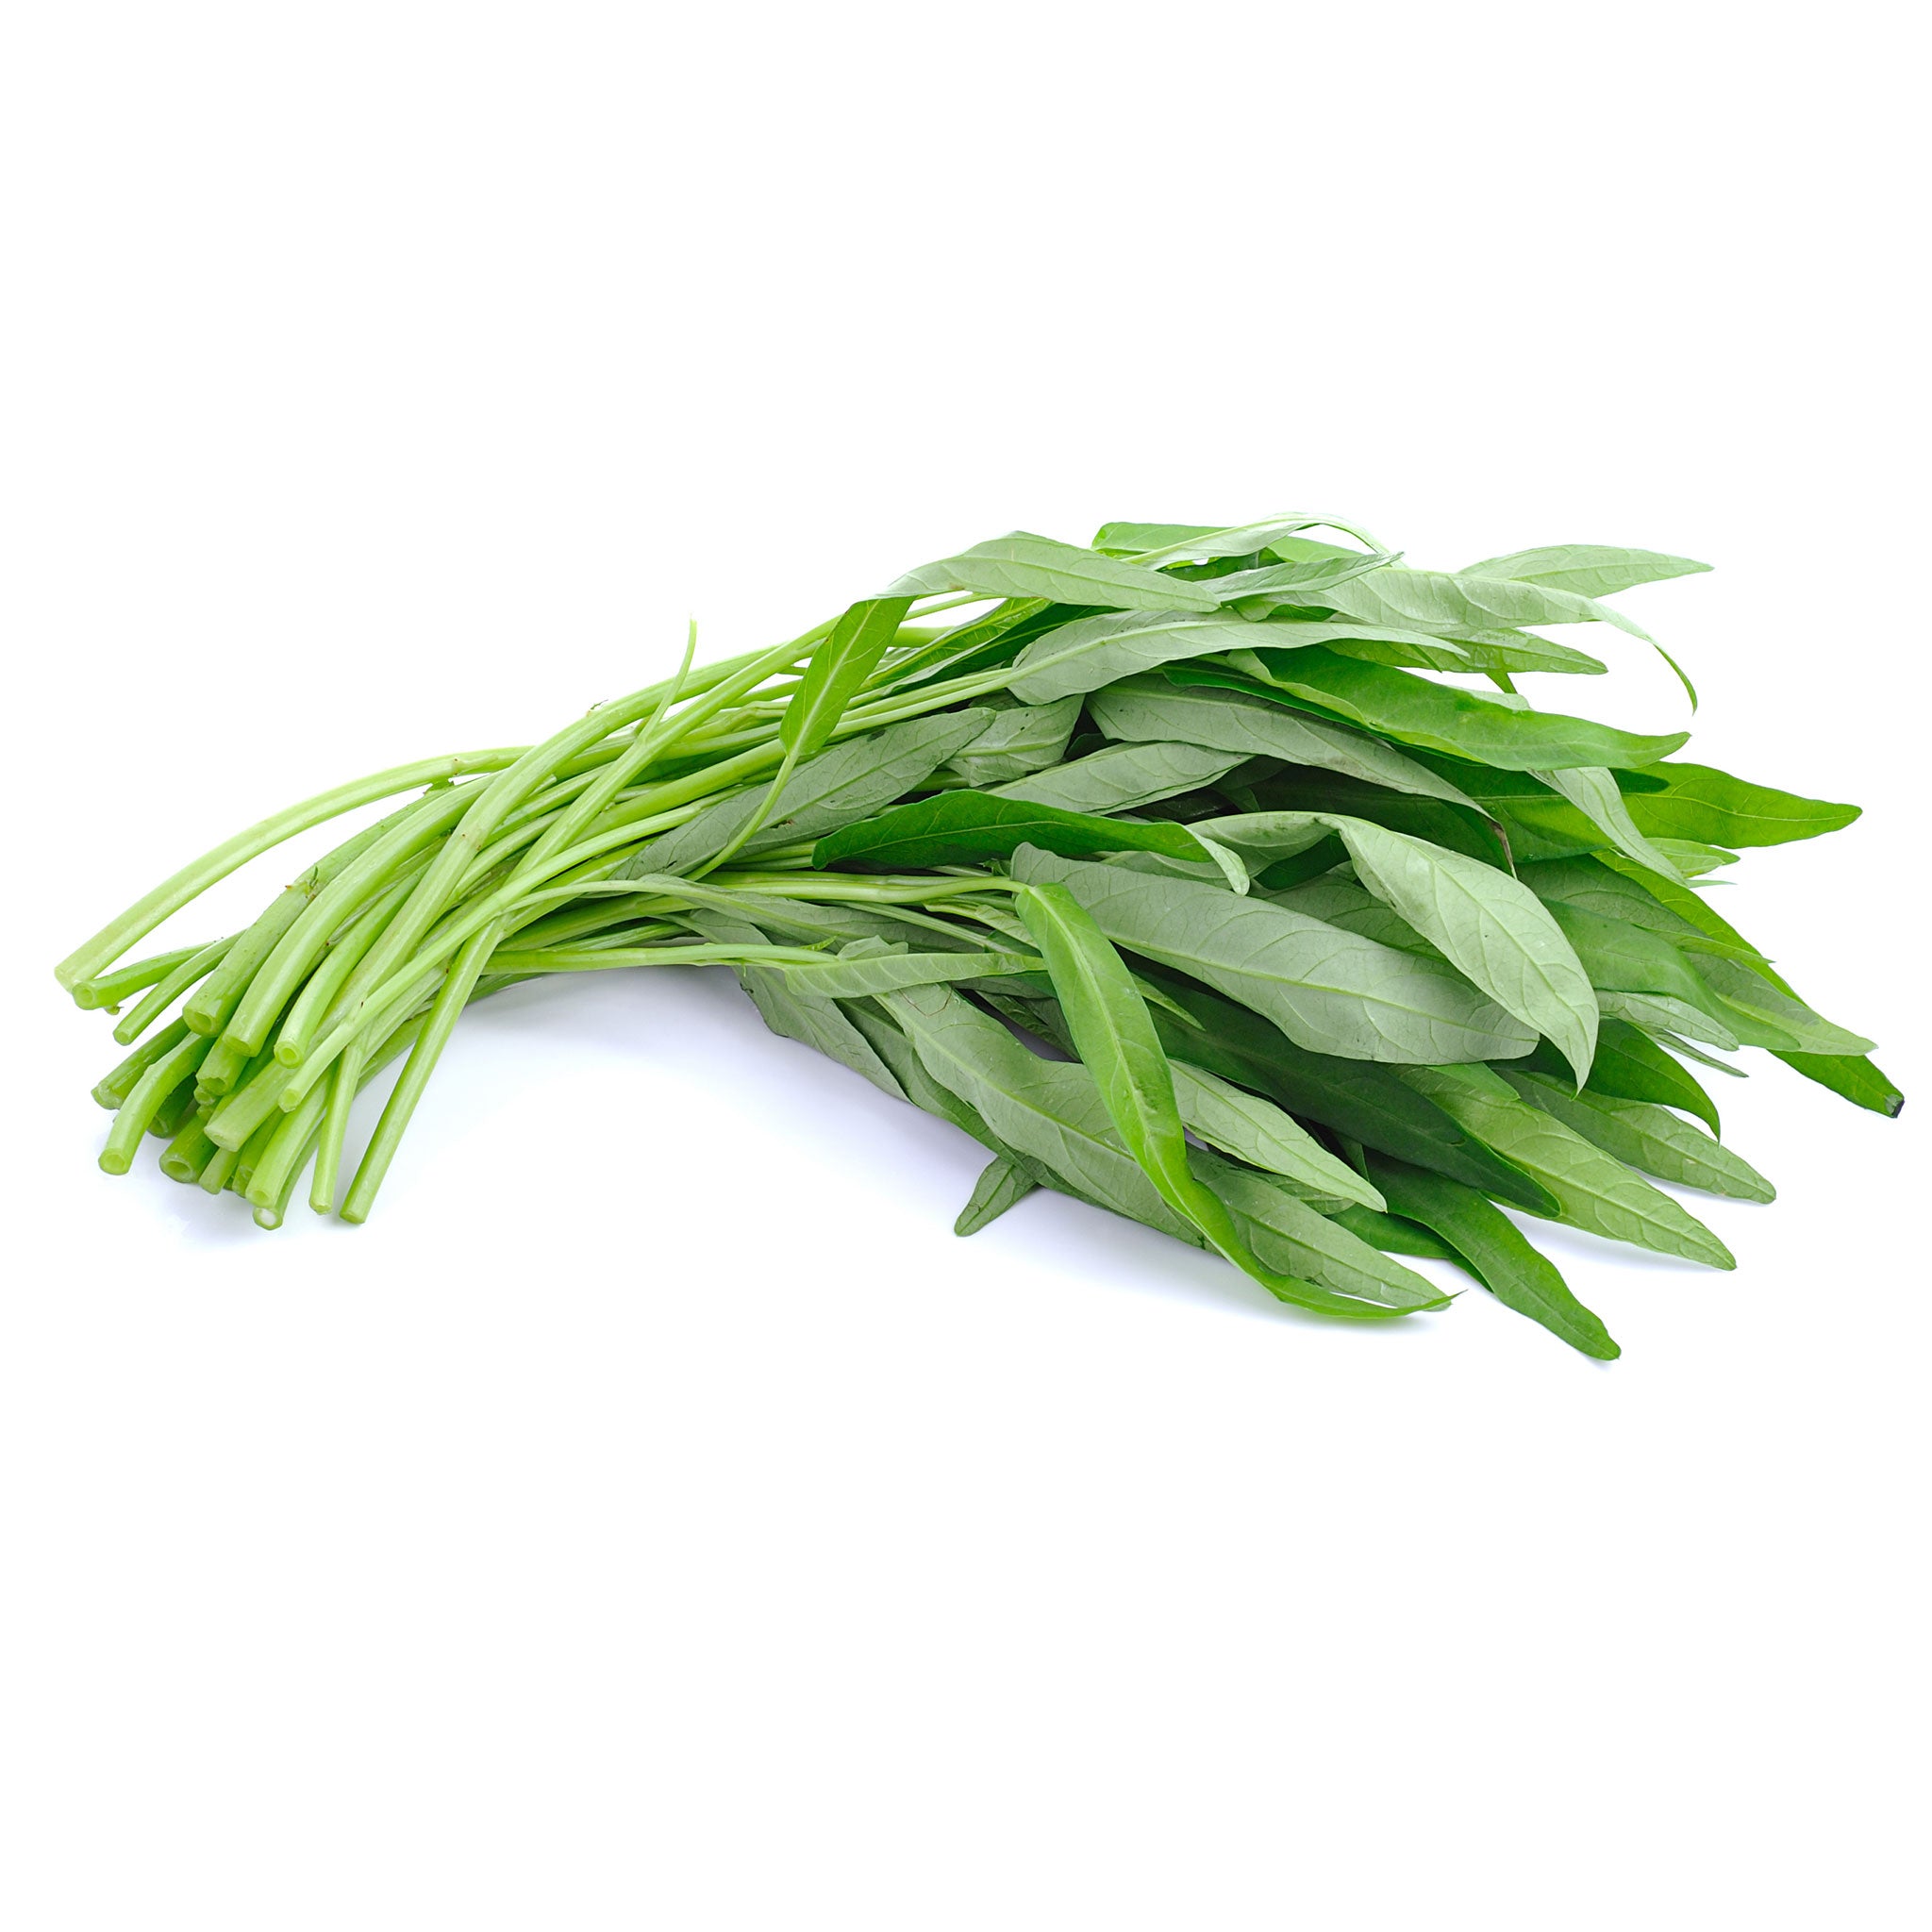 Fresh Thai Morning Glory (Water Spinach) 200g - Imported Weekly from Thailand